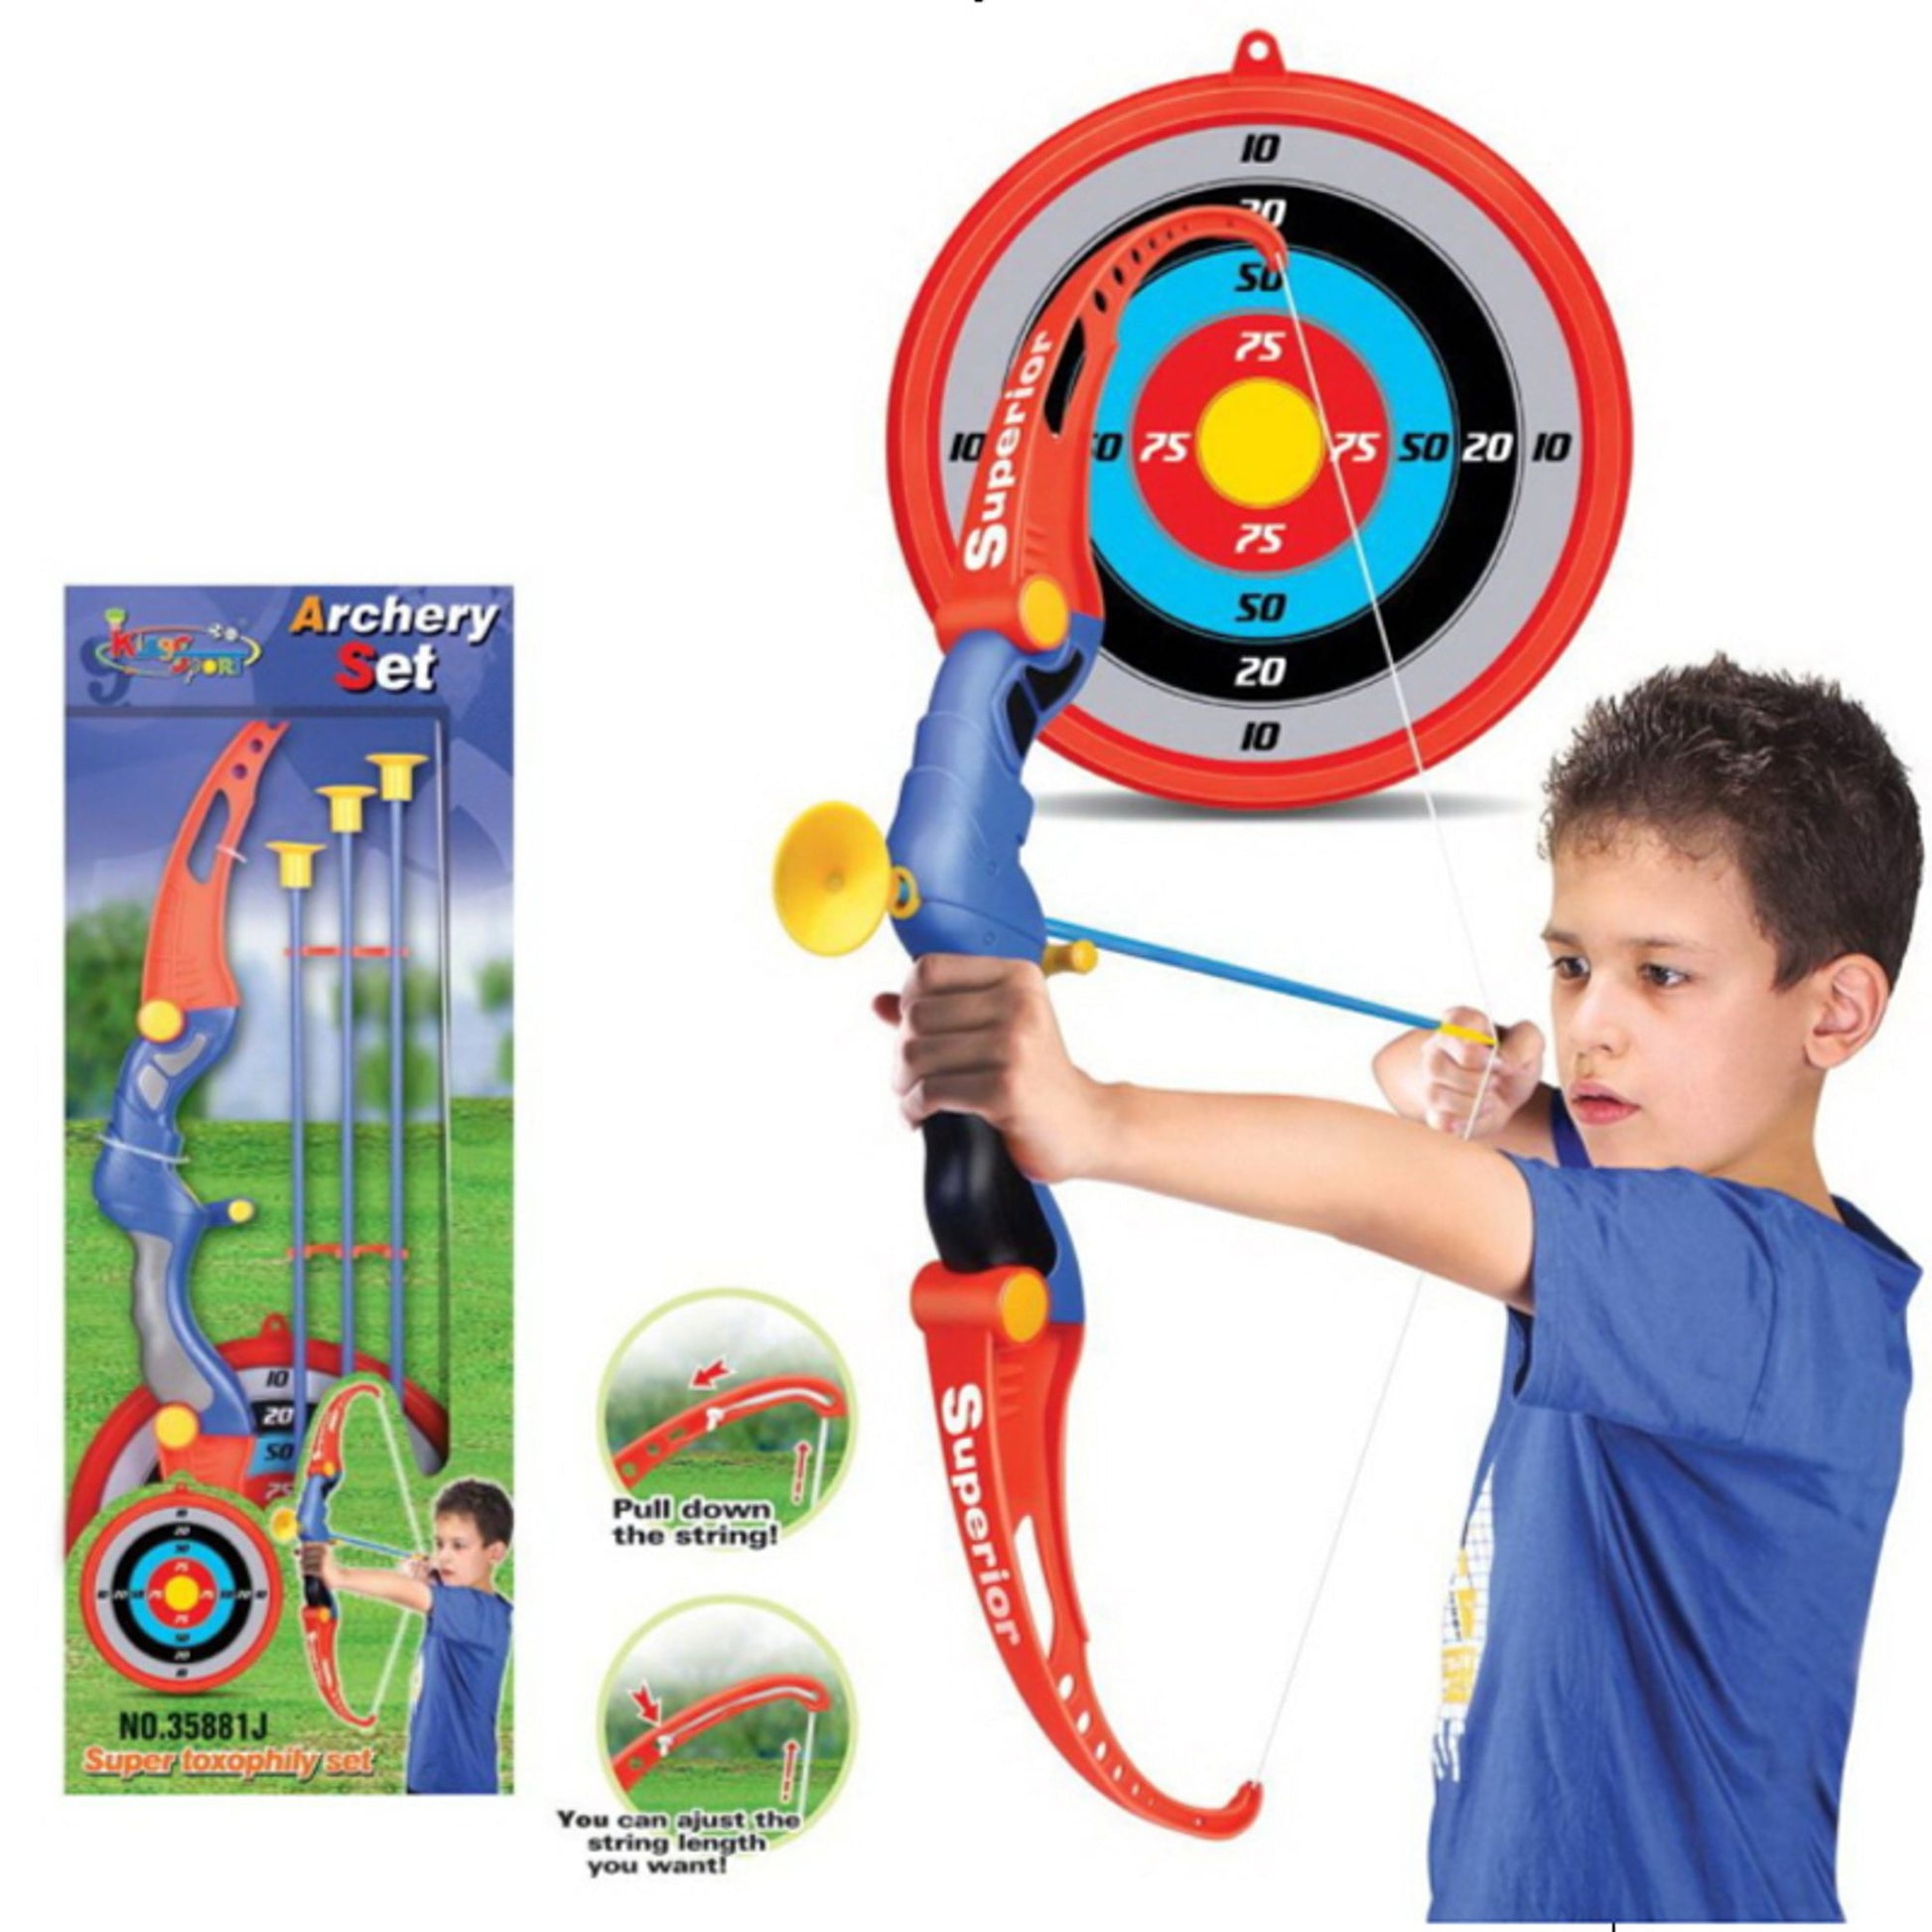 King Sport Toy Archery Toxophily Set Bow Suction Arrows Target/ arrow holder - Homeware Discounts